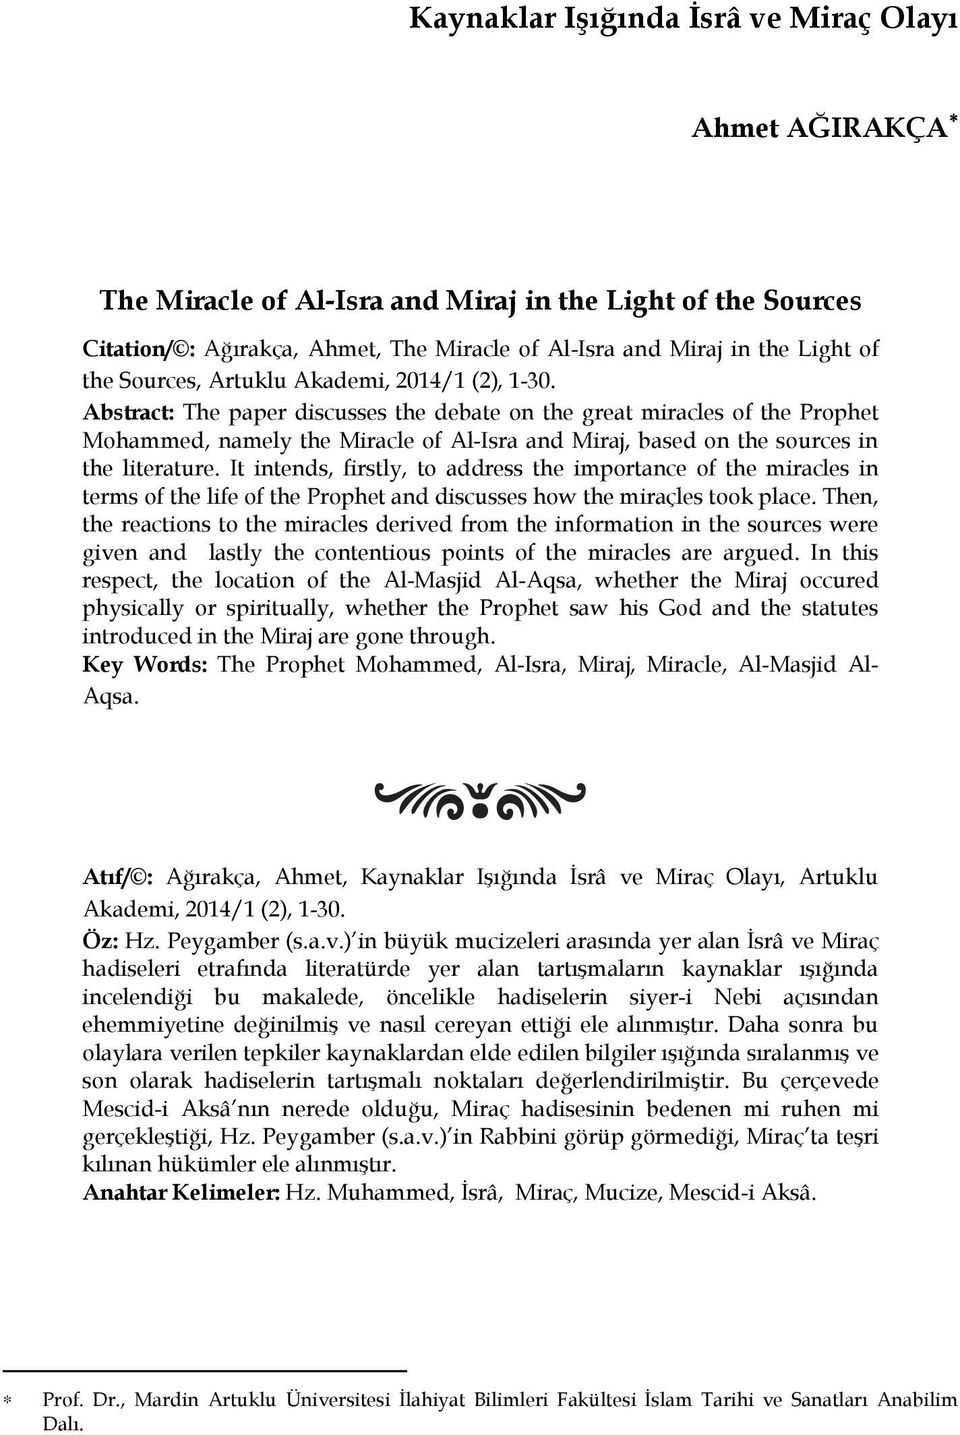 Abstract: The paper discusses the debate on the great miracles of the Prophet Mohammed, namely the Miracle of Al-Isra and Miraj, based on the sources in the literature.